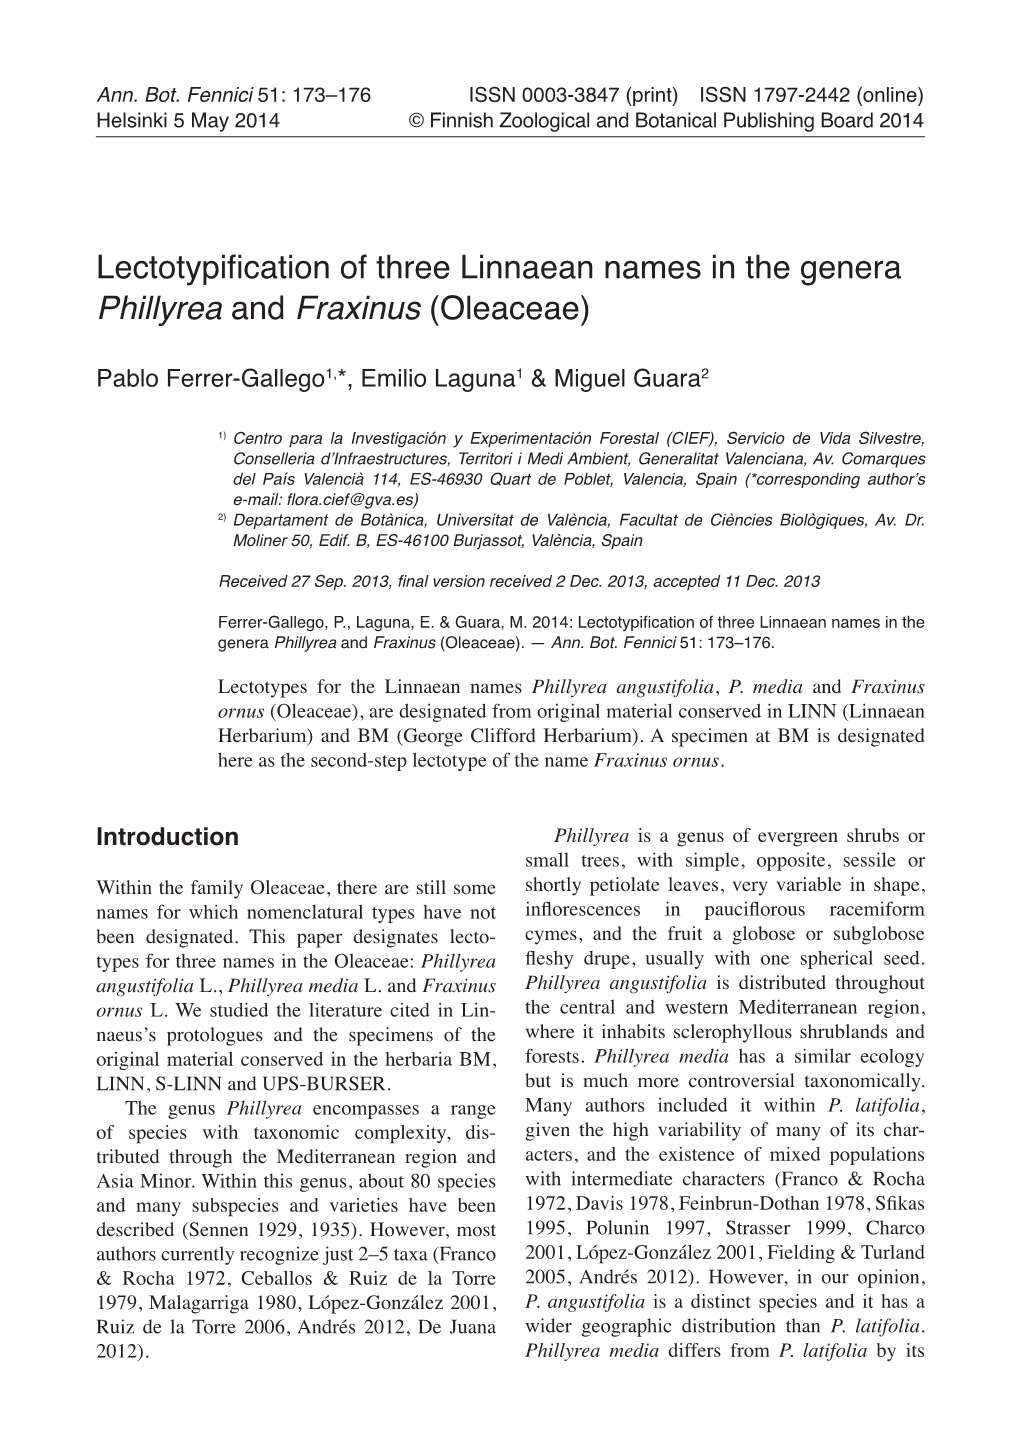 Lectotypification of Three Linnaean Names in the Genera Phillyrea and Fraxinus (Oleaceae)